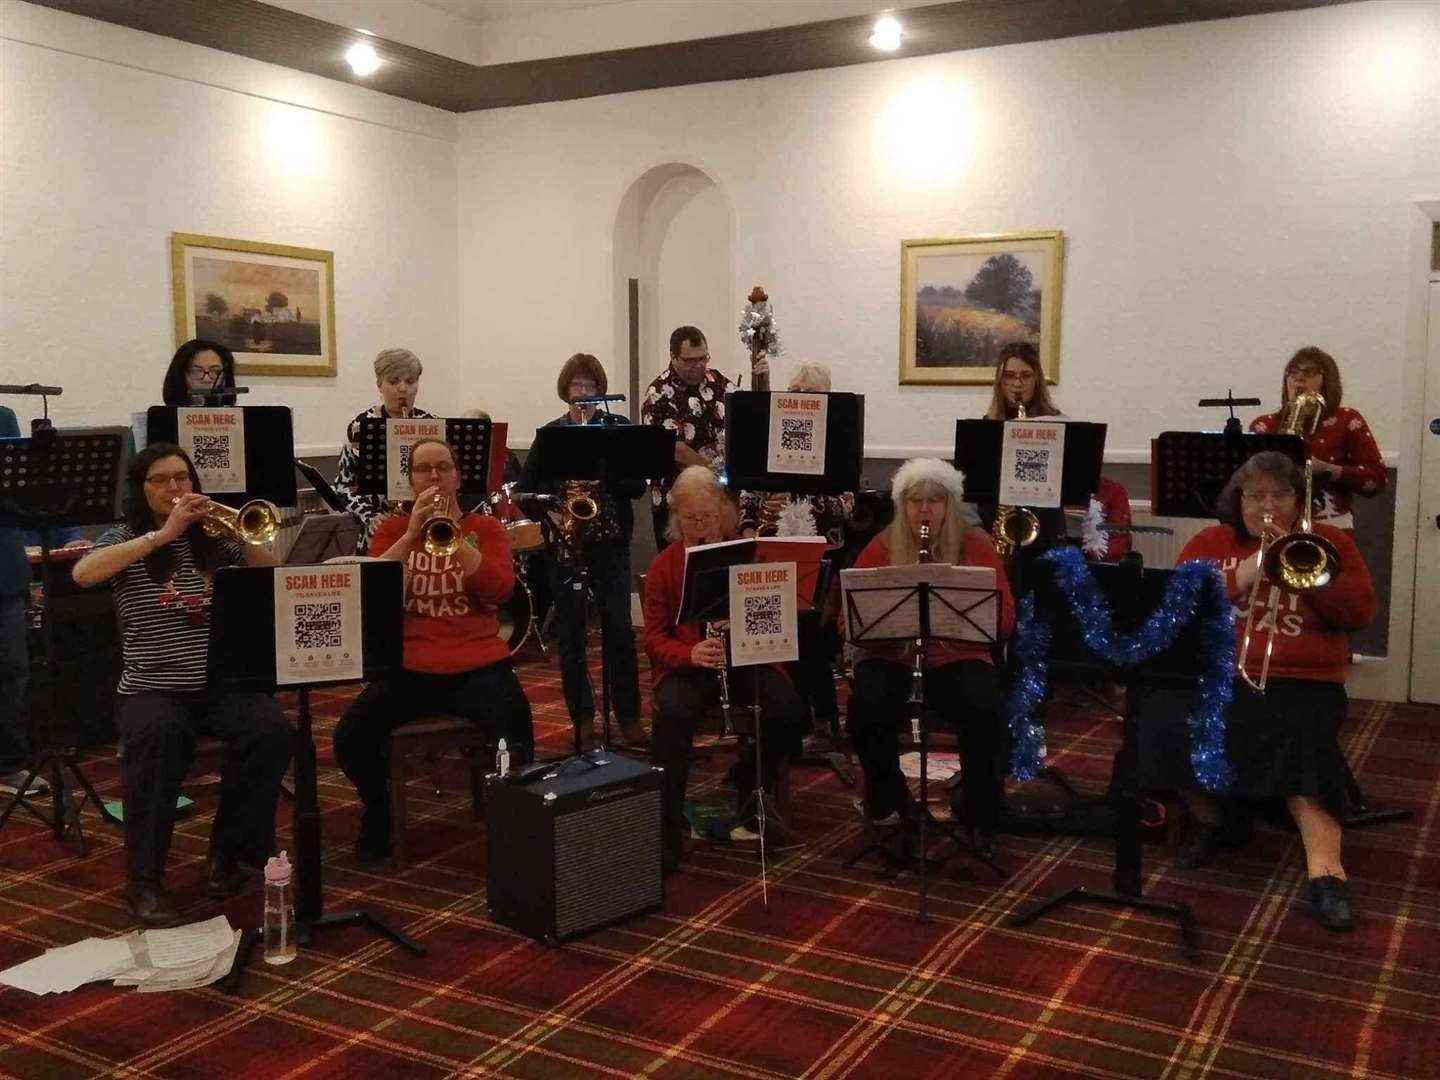 The Sunday Swing concert raised funds for Arran's Appeal